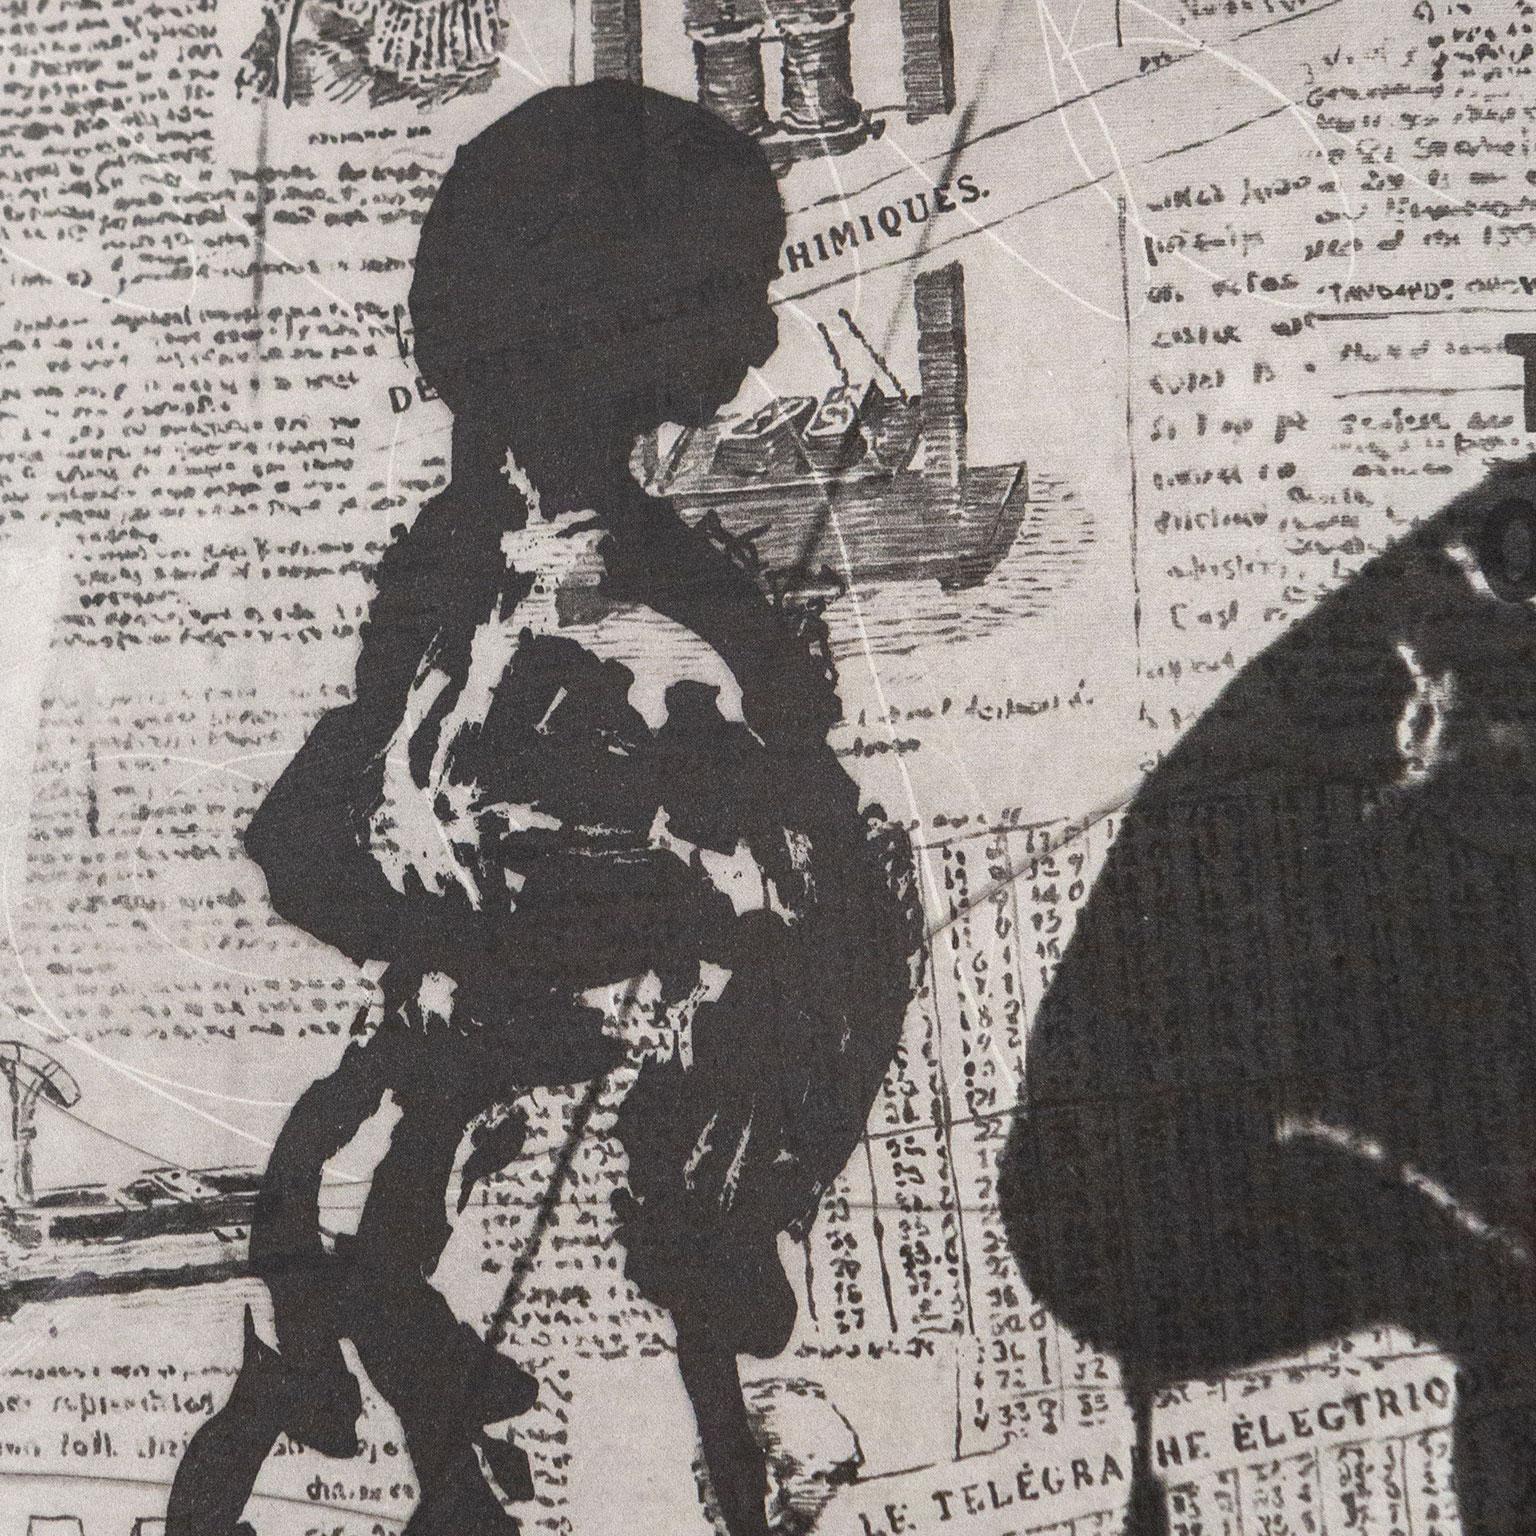 William Kentridge (b. 1955) is an internationally acclaimed South African artist renowned for his dynamic prints, drawings, large-scale installations, and animated films. Kentridge balances universal experiences with the complexity of South African